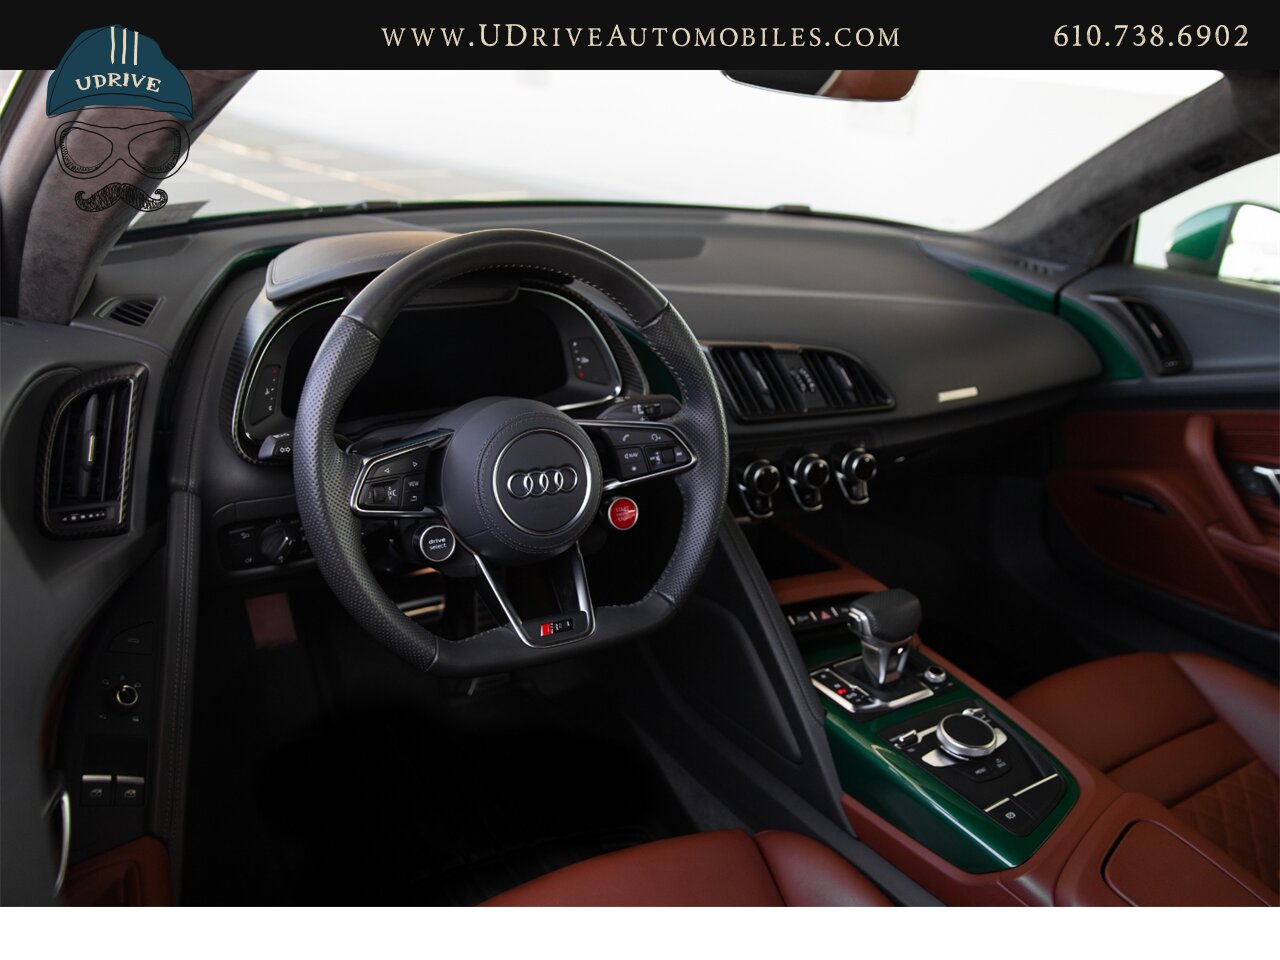 2017 Audi R8 Audi Exclusive Avocado Green Vermont Brown Leather  Diamond Stitching V10 Carbon Fiber - Photo 35 - West Chester, PA 19382